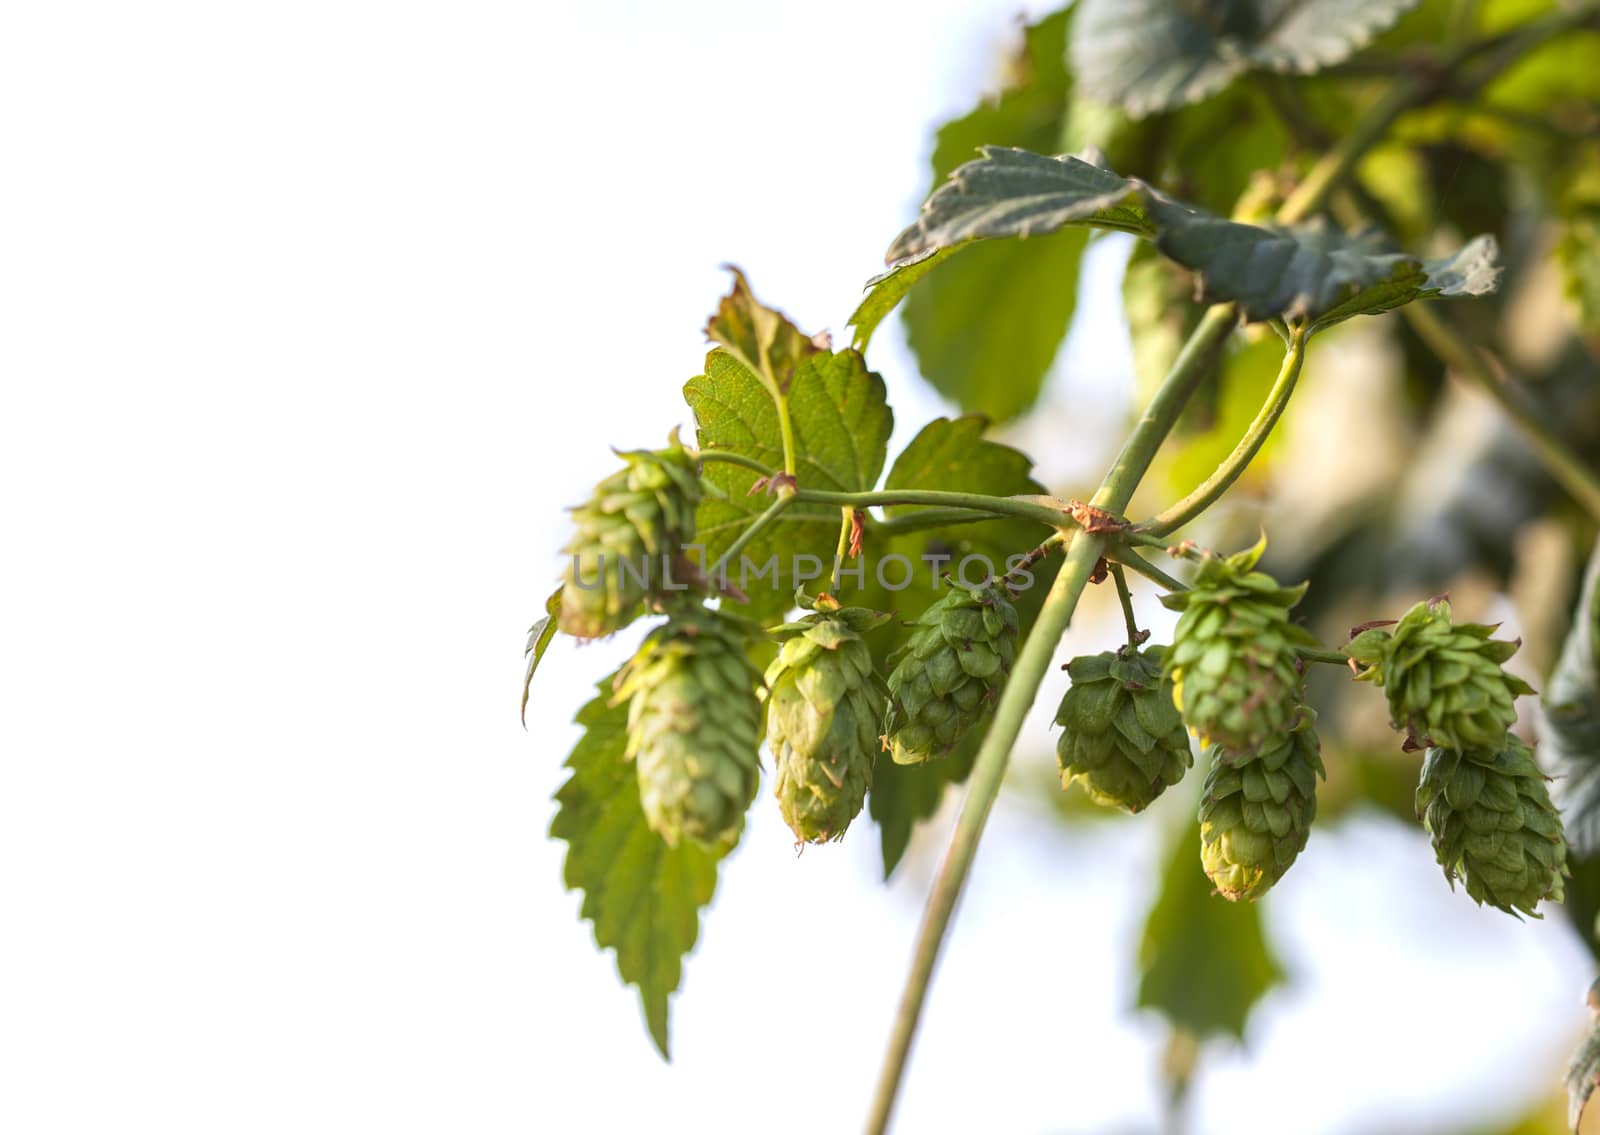 Hop plant close up growing on a Hop farm. Fresh and Ripe Hops ready for harvesting. Beer production ingredient. Brewing concept. Fresh Hop over blurred nature green background and isolated on white.